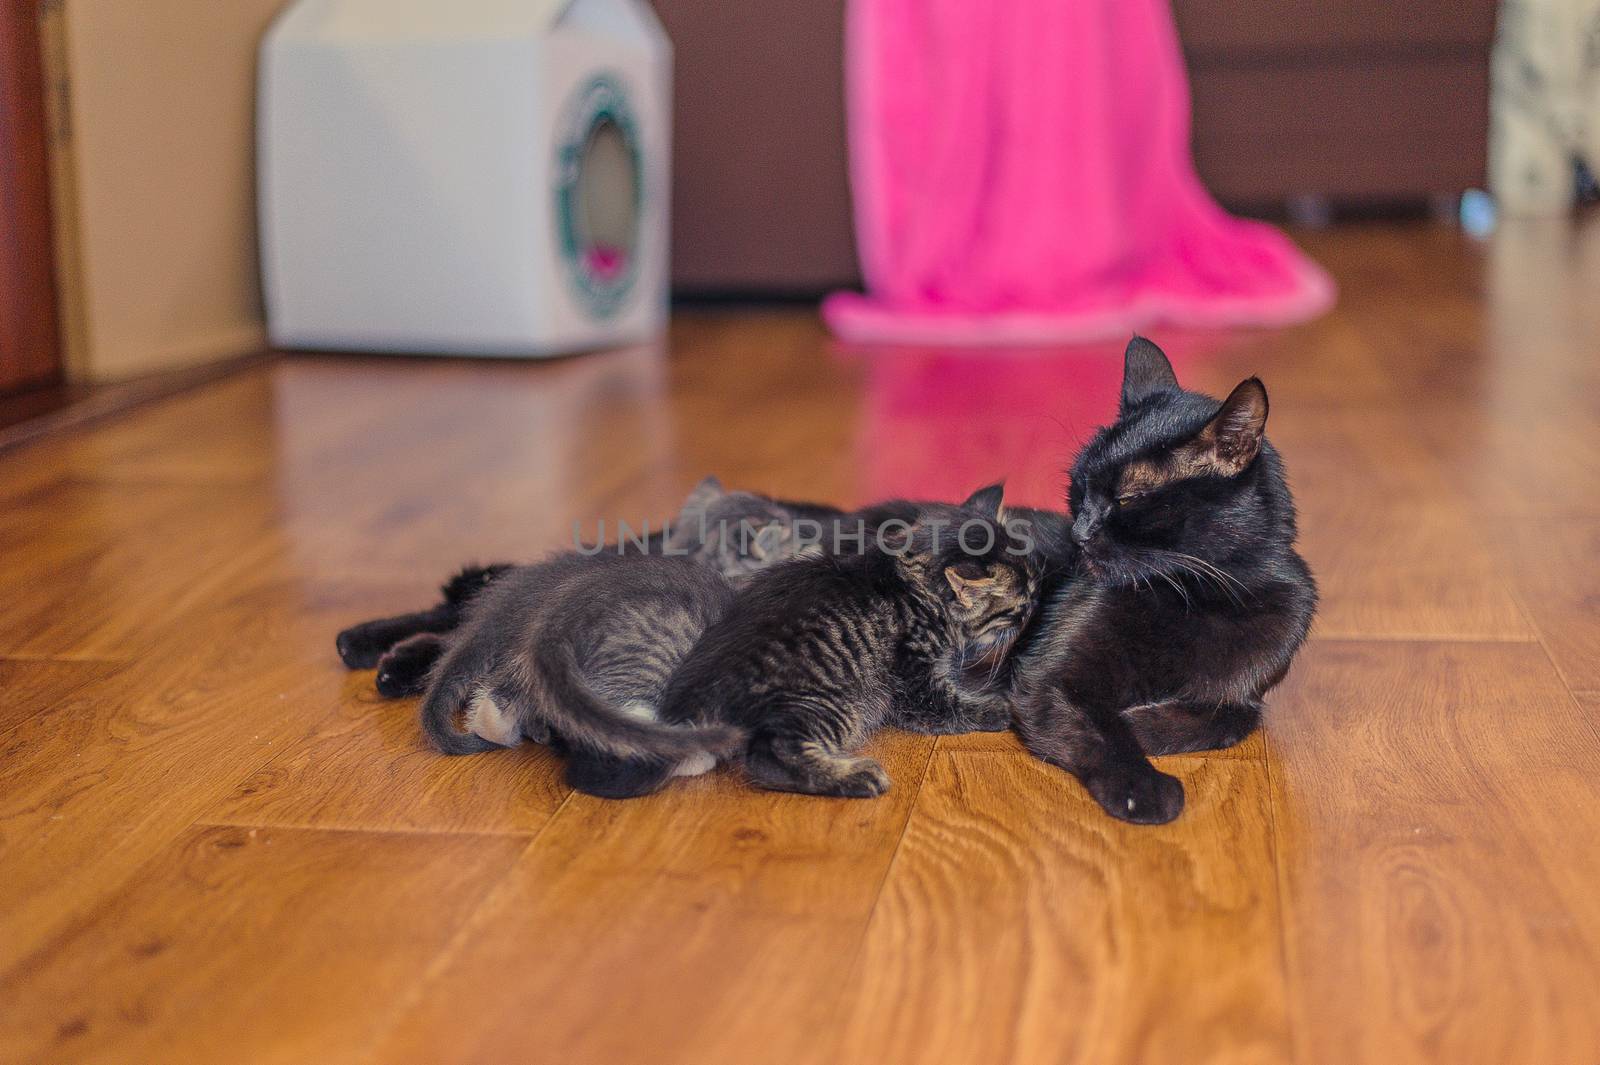 cat with kittens lies on a wooden floor in the room by chernobrovin